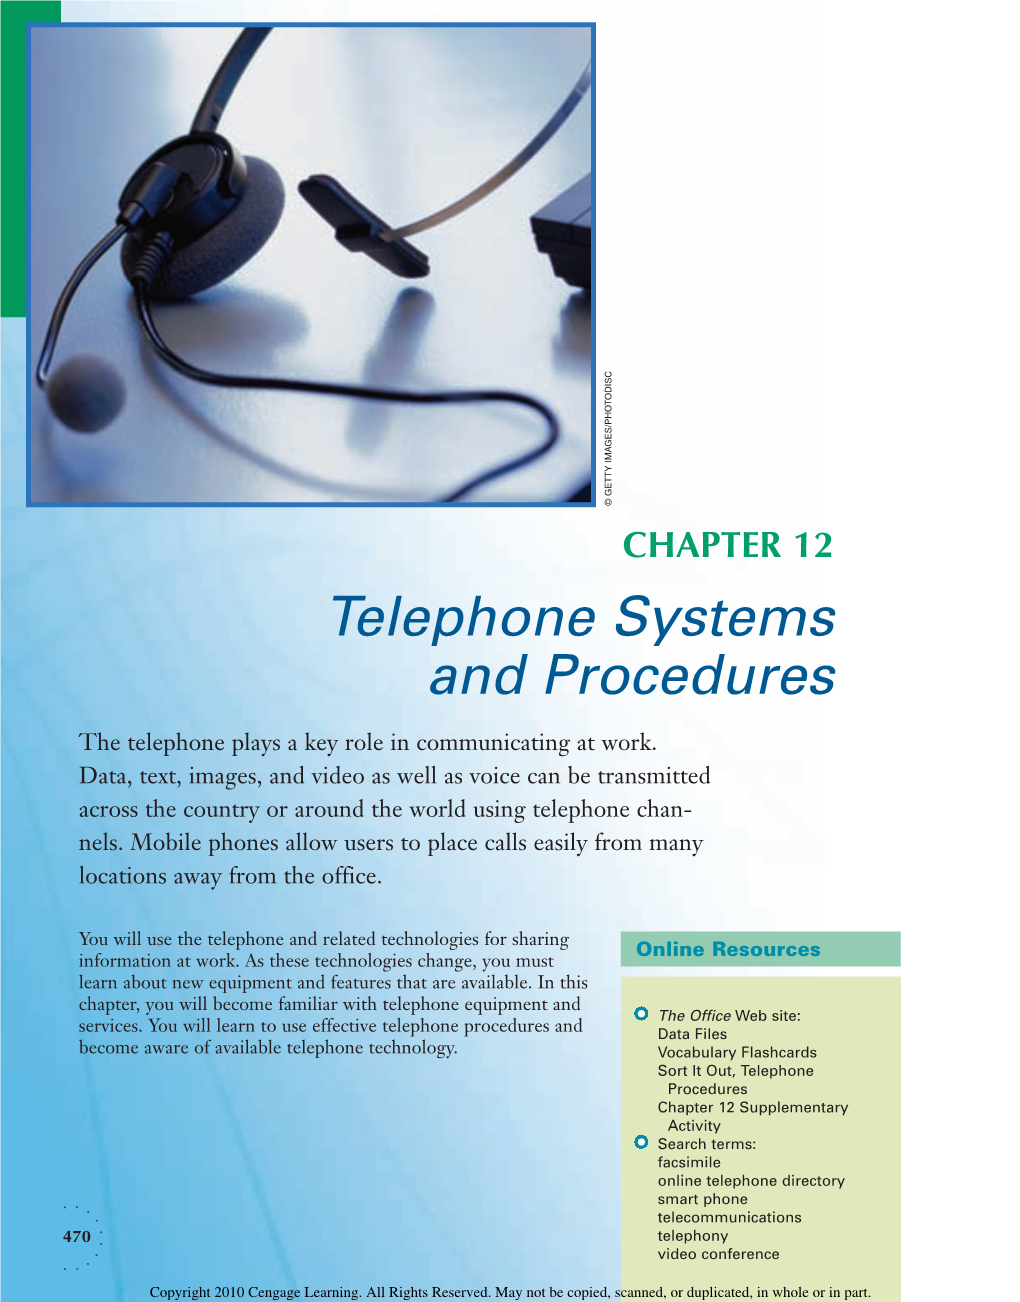 Telephone Systems and Procedures